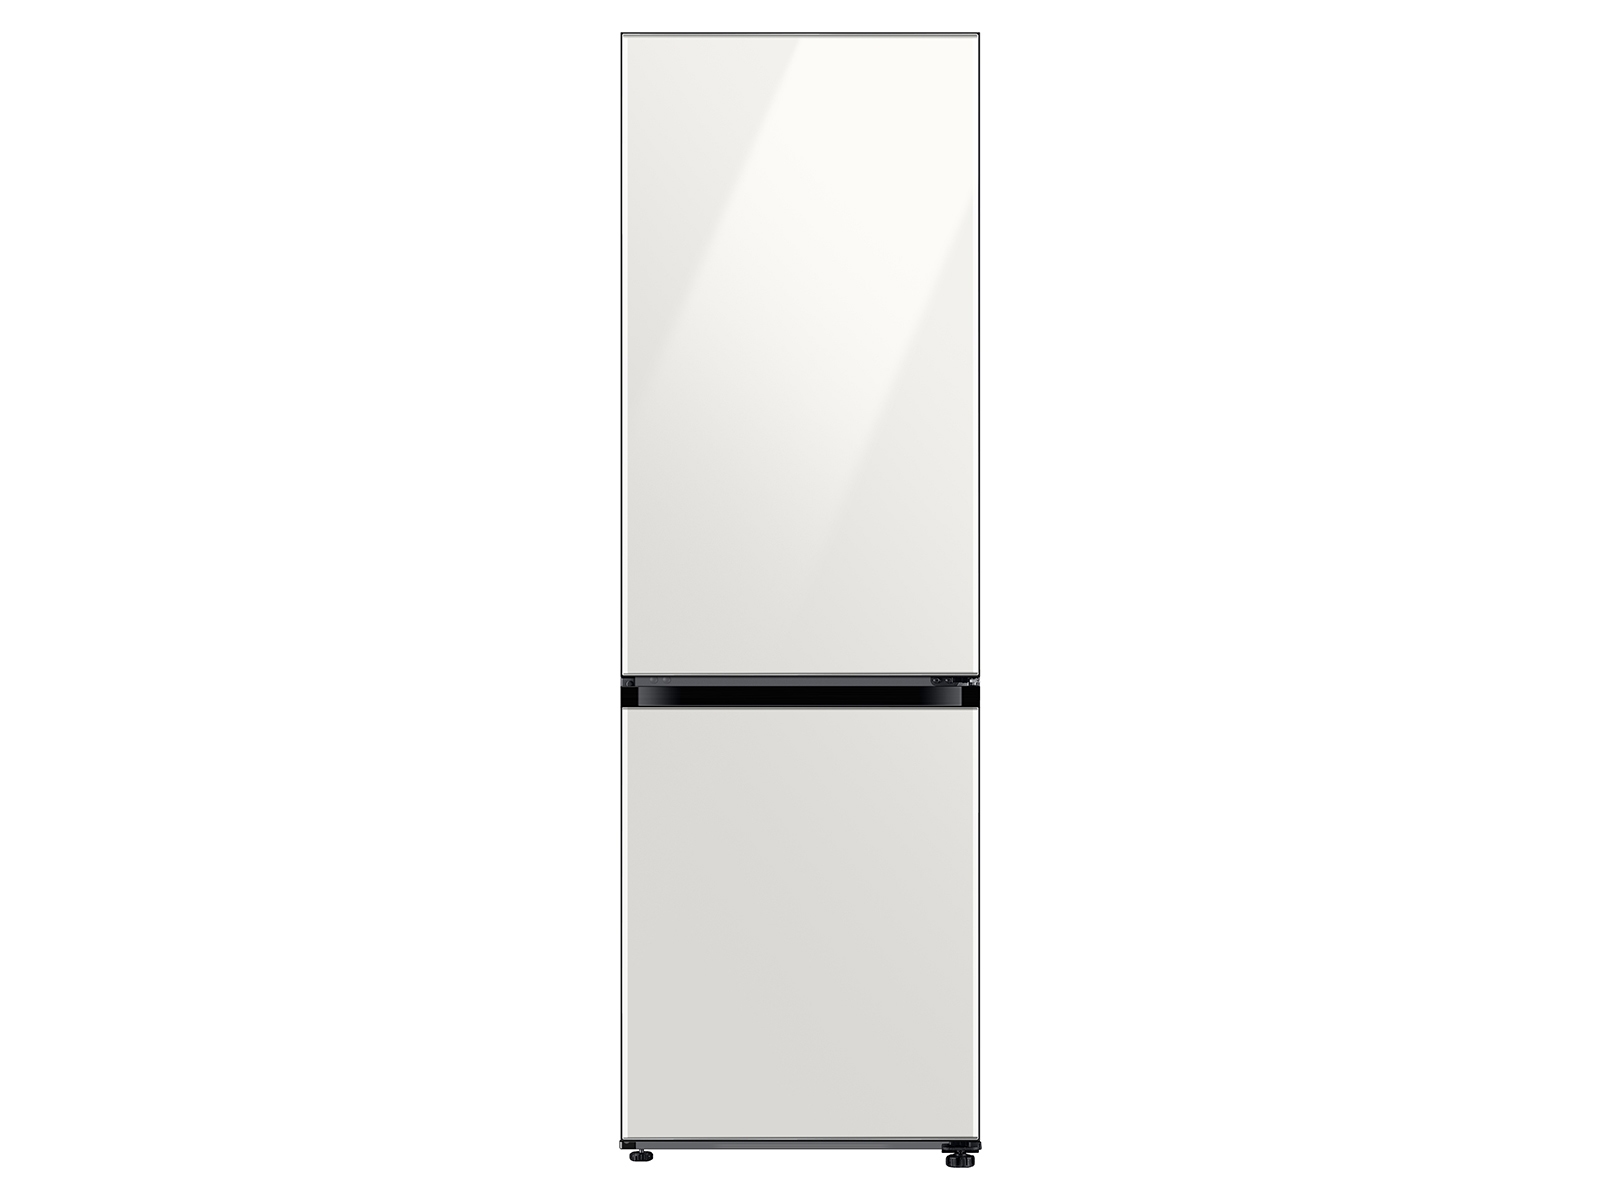 12.0 cu. ft. BESPOKE Bottom Freezer refrigerator with customizable colors  and flexible design in White Glass